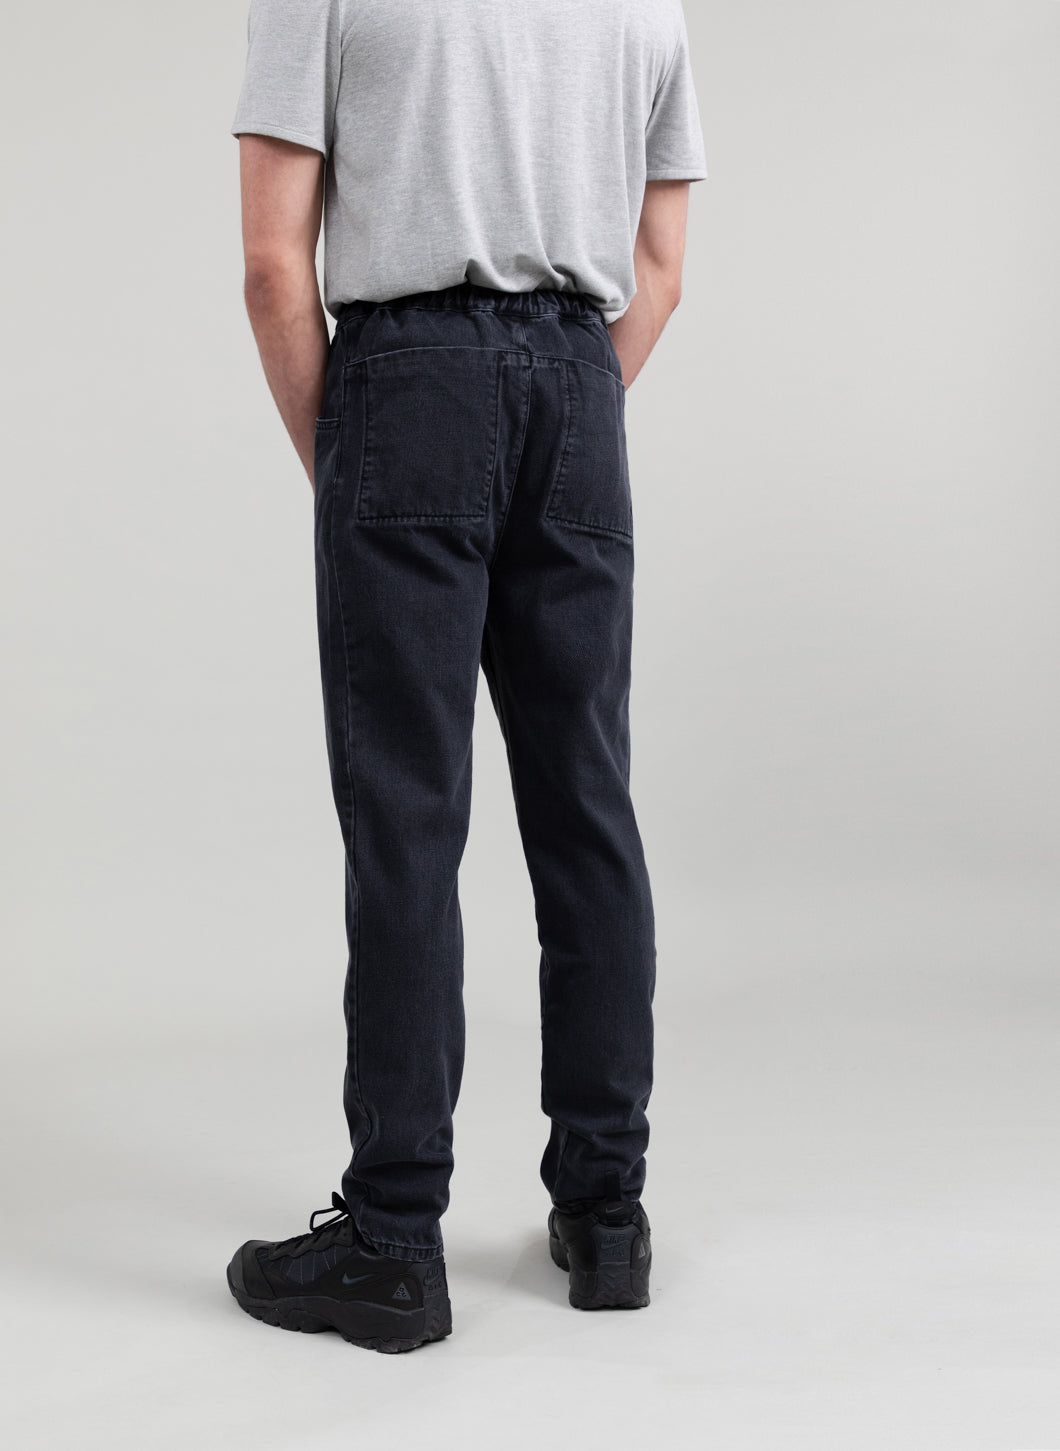 5 Pockets Pants with Front Cuts in Black Denim